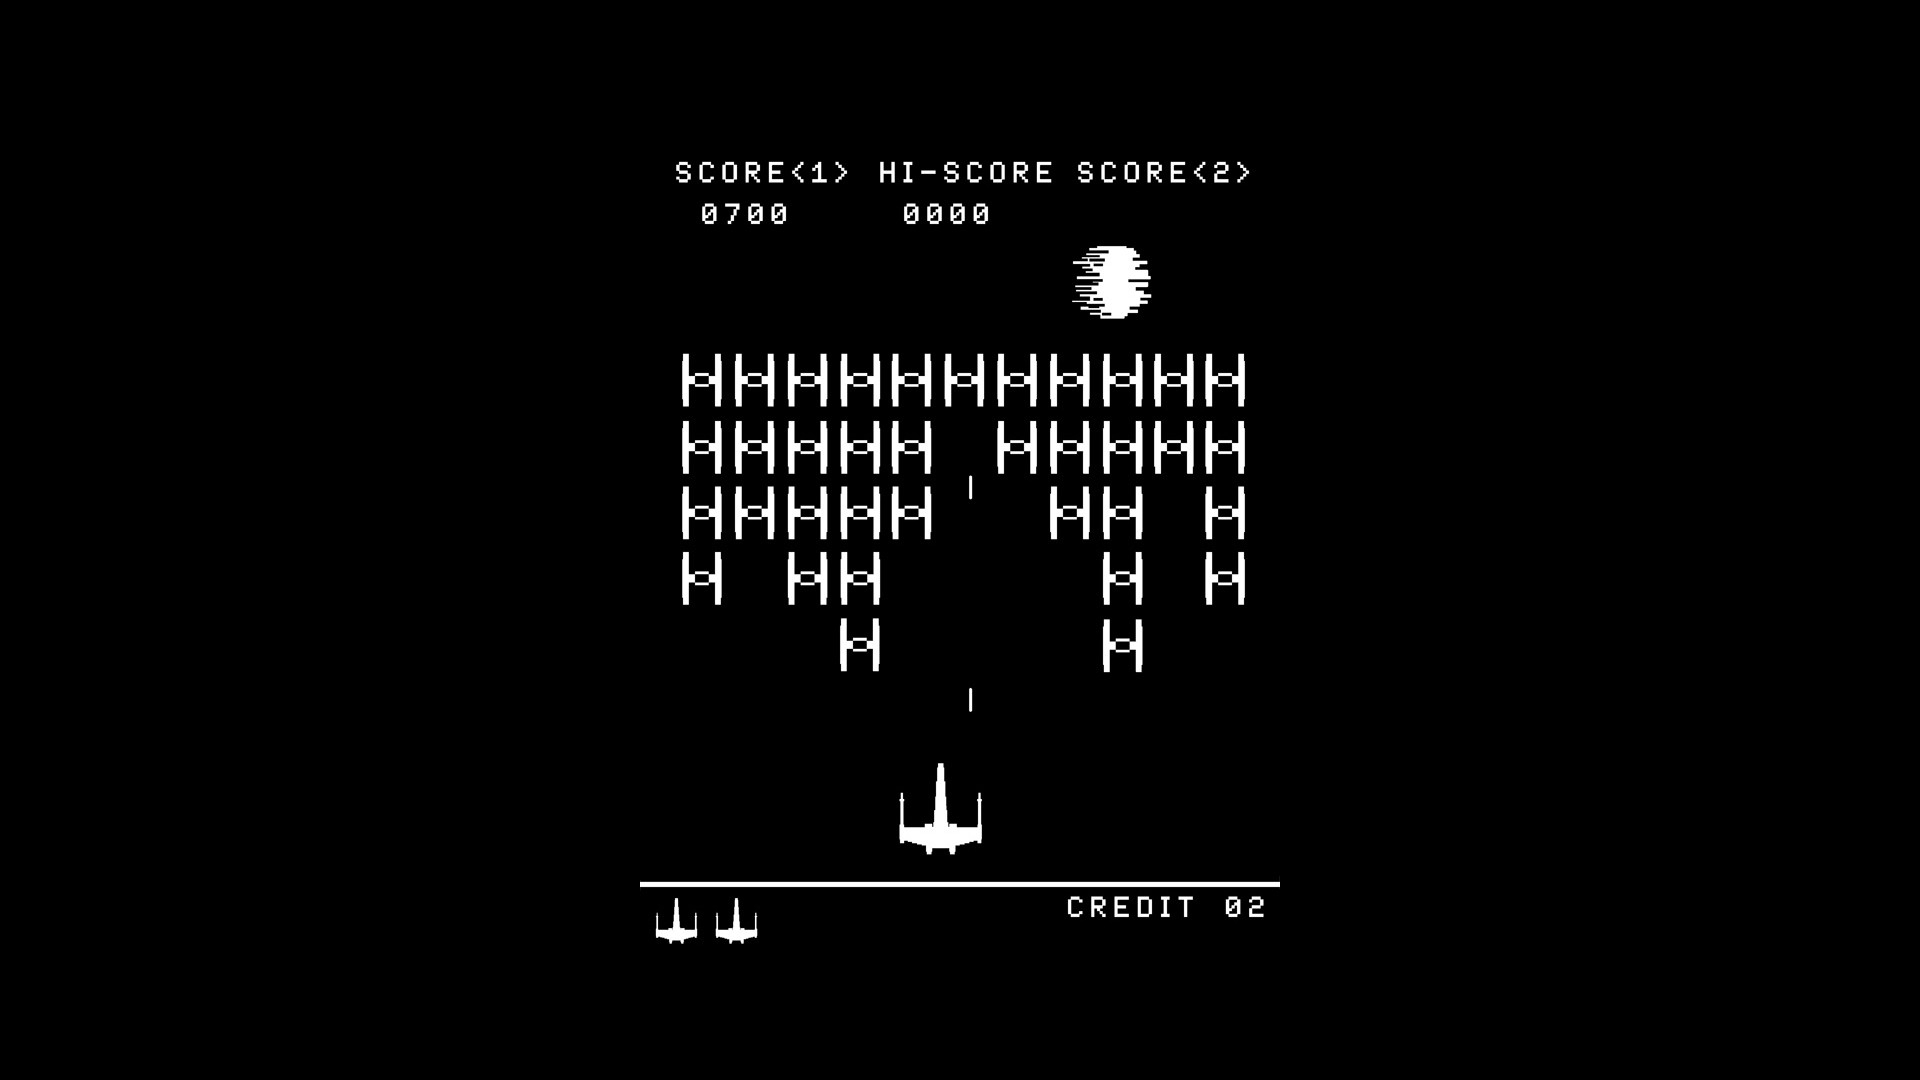 abstract, Star, Wars, Arcade, Death, Star, Video, Space, Invaders, Atari, Solid, Simplistic, Simple Wallpaper